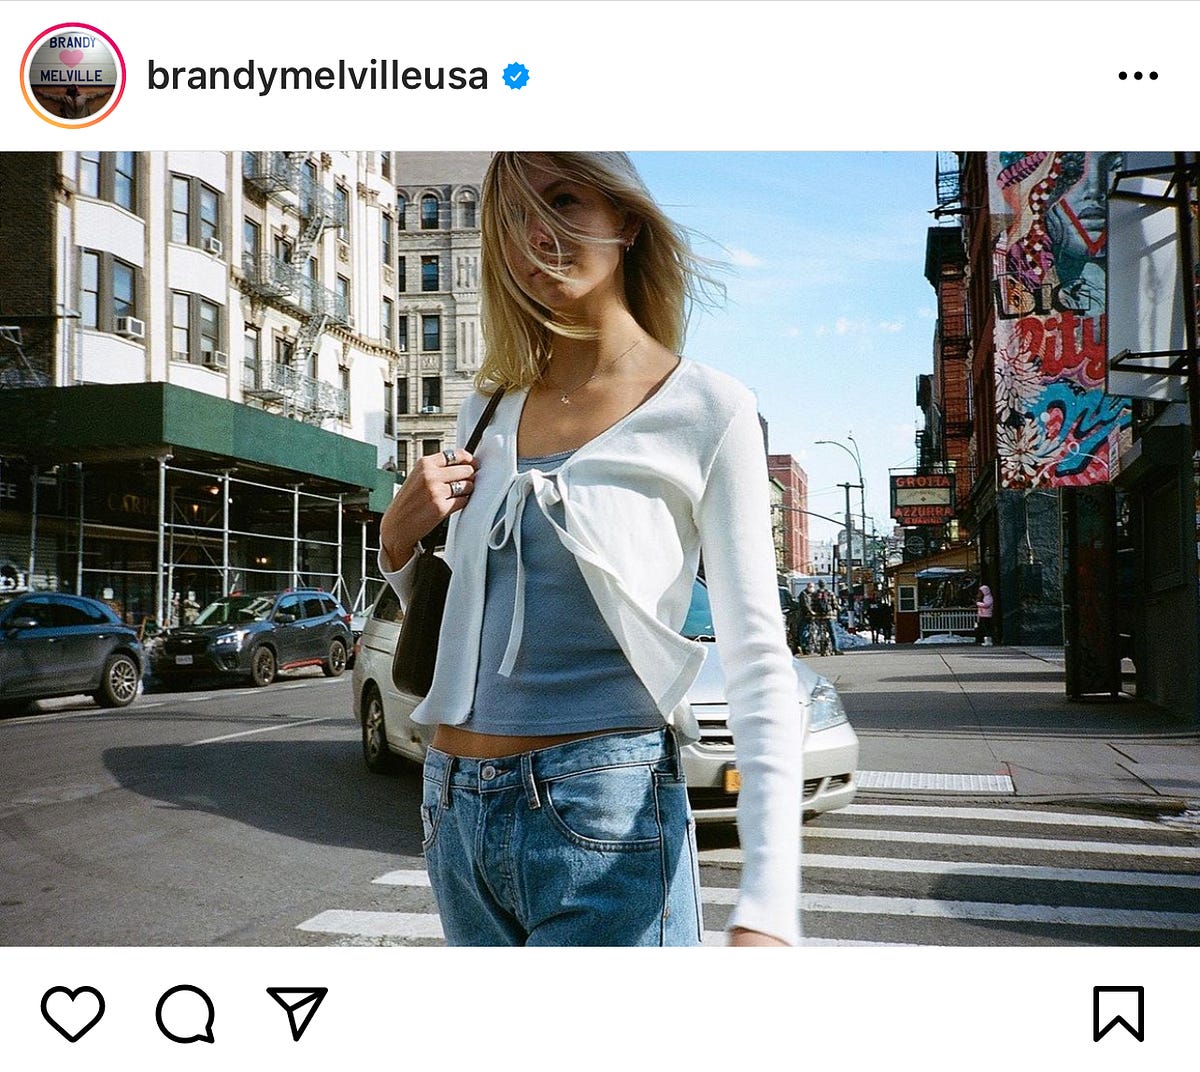 One size never fits most: Brandy Melville is damaging young